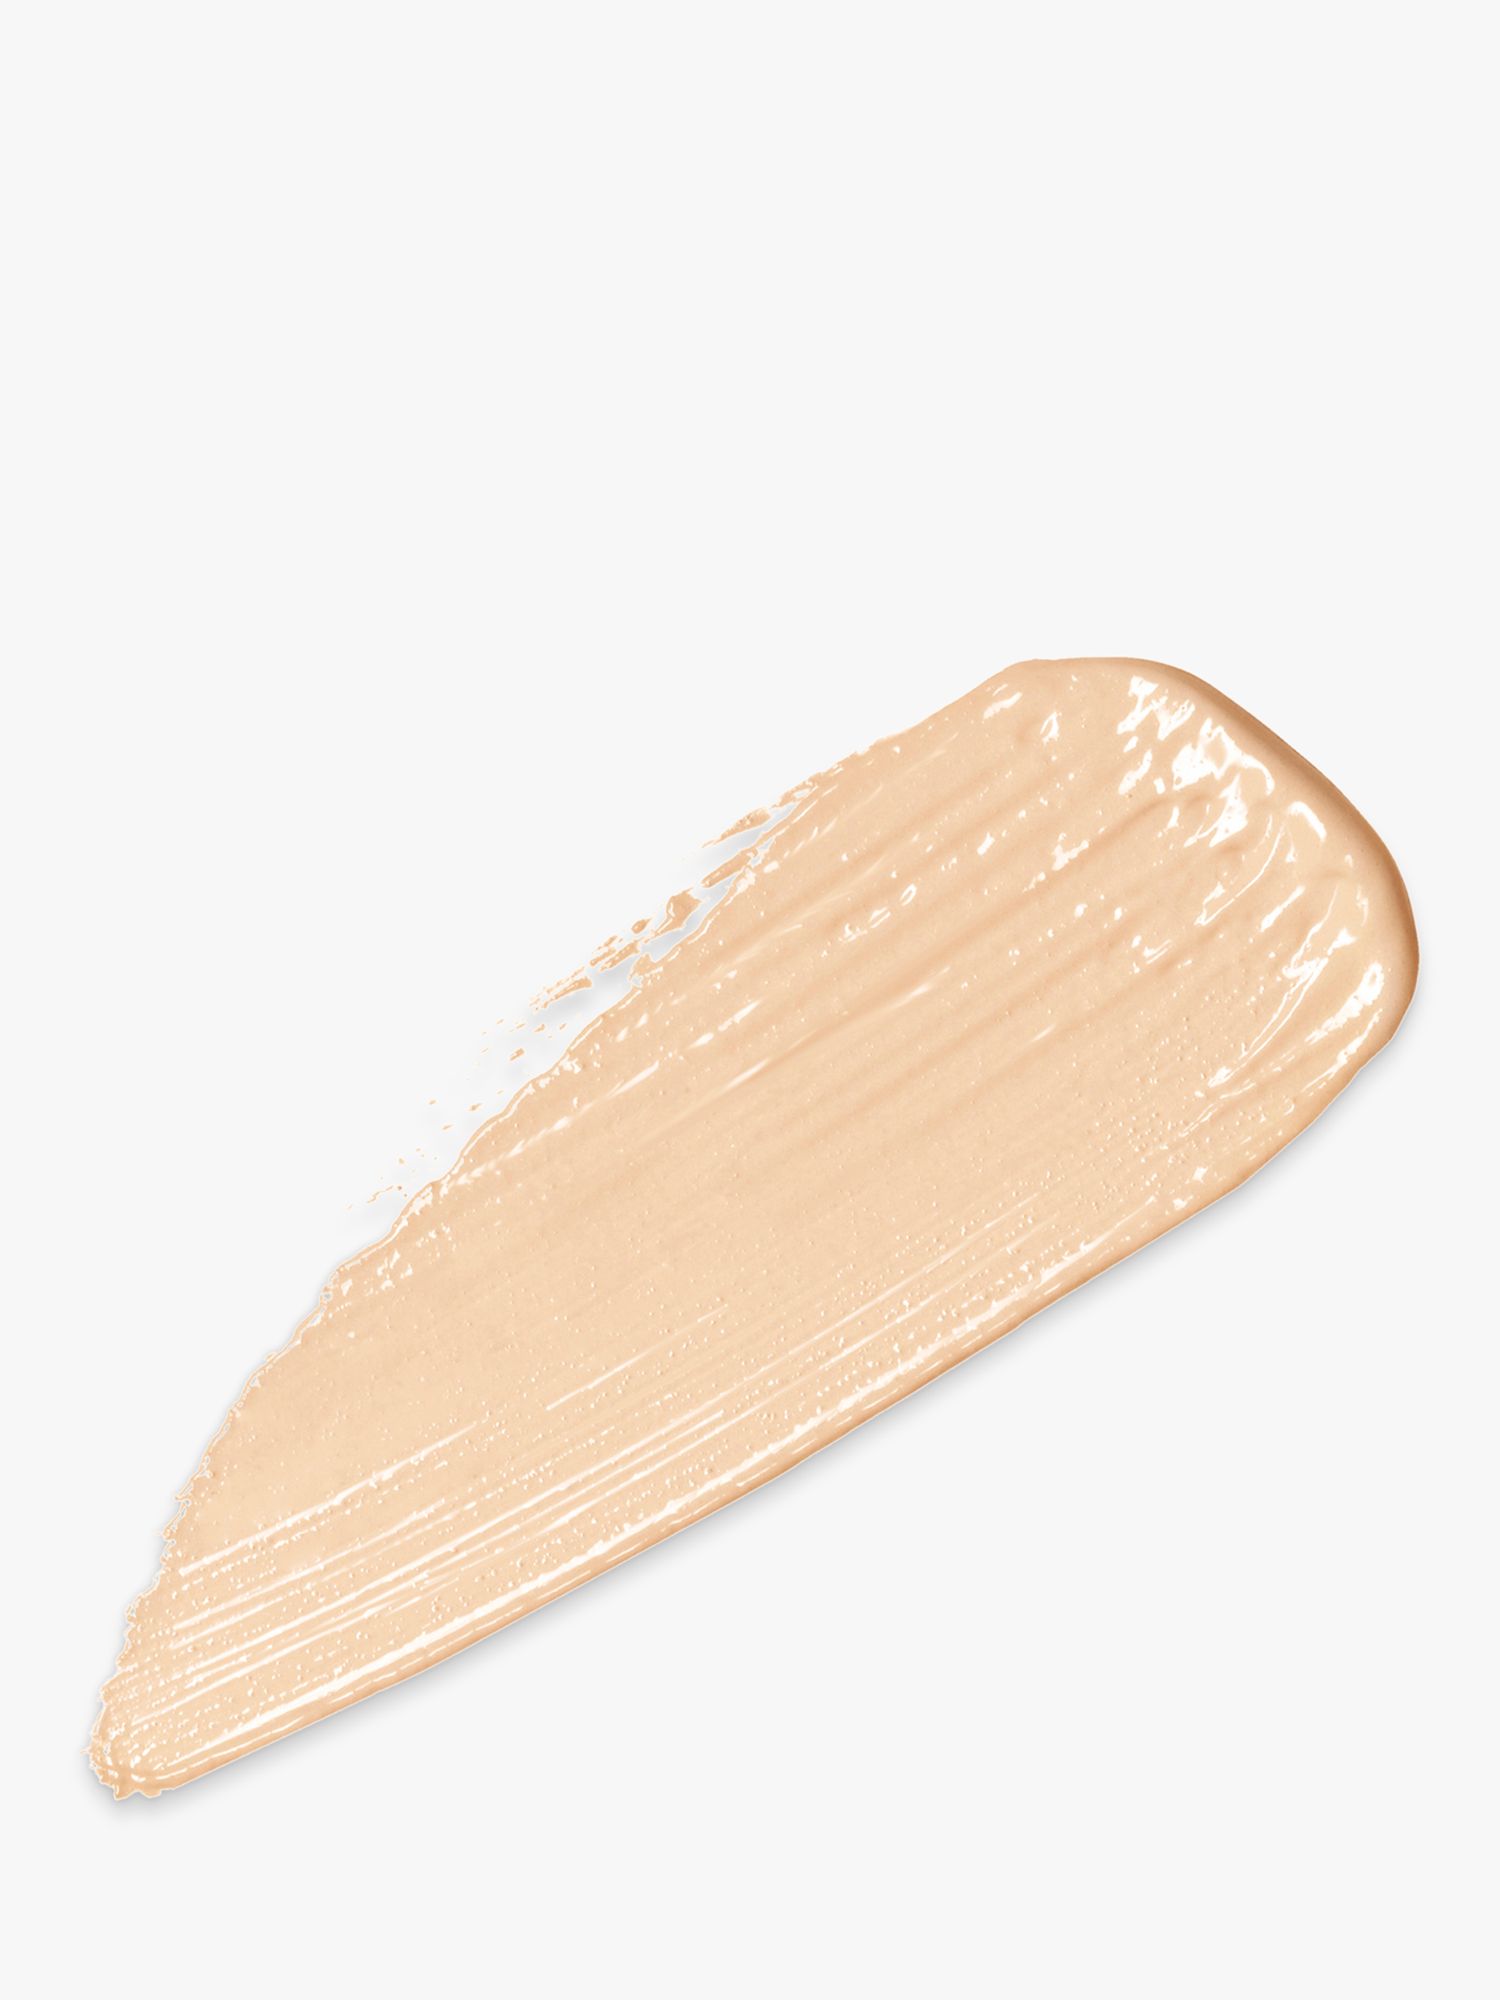 NARS Radiant Creamy Concealer, Chantilly 3